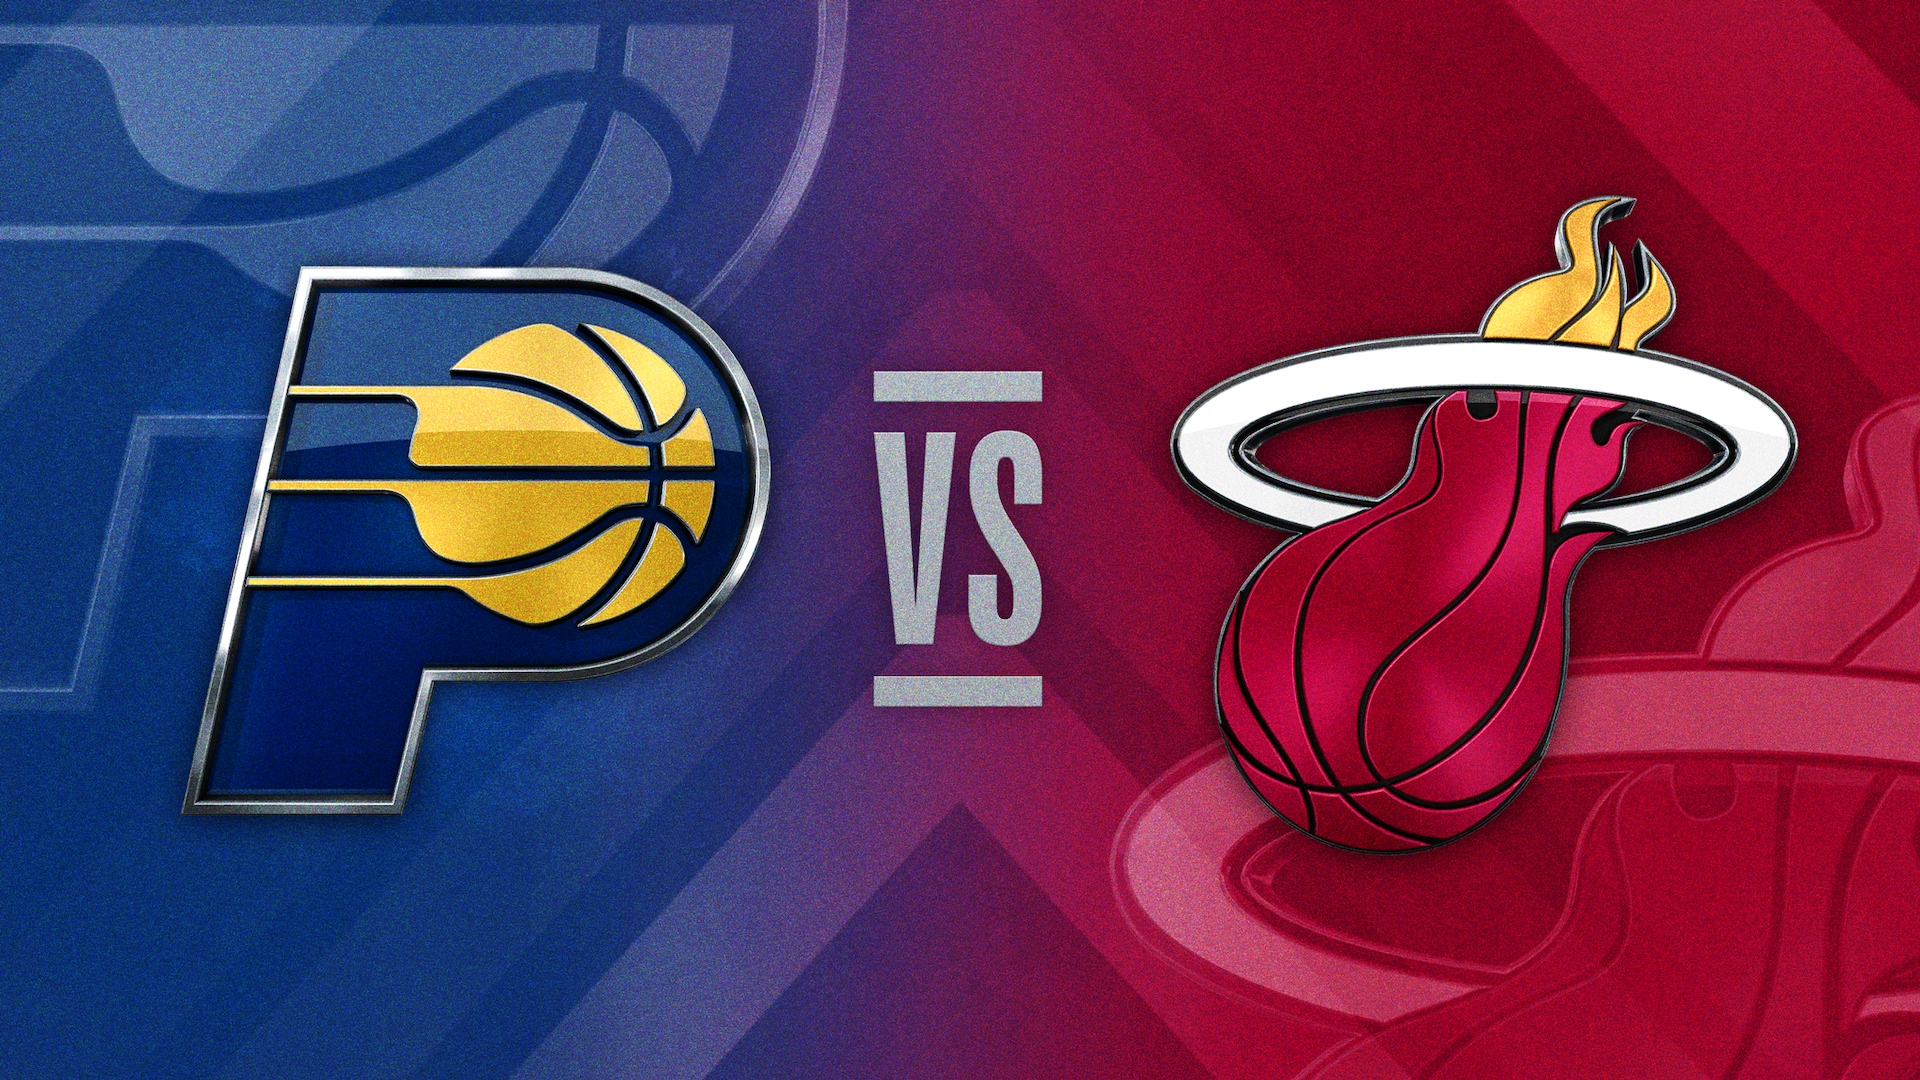 GAME 4 : Indiana Pacers vs Miami Heat